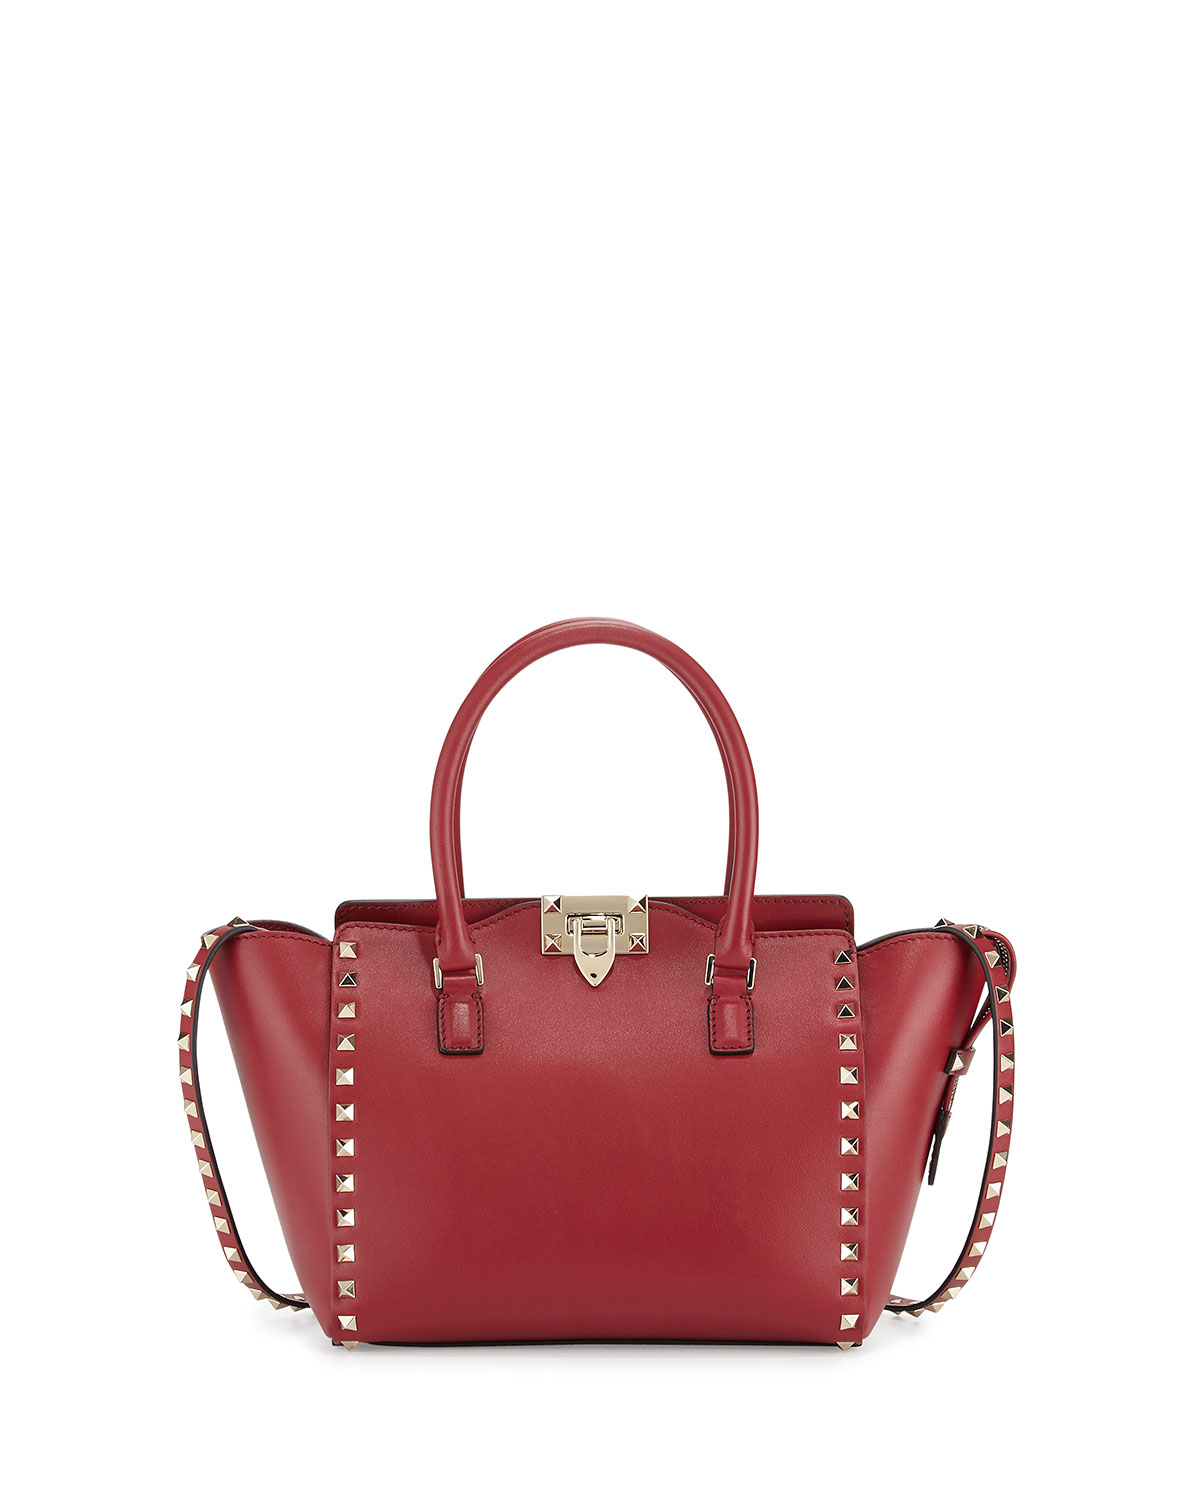 Lyst - Valentino Rockstud Small Leather Shopper Tote Bag in Red